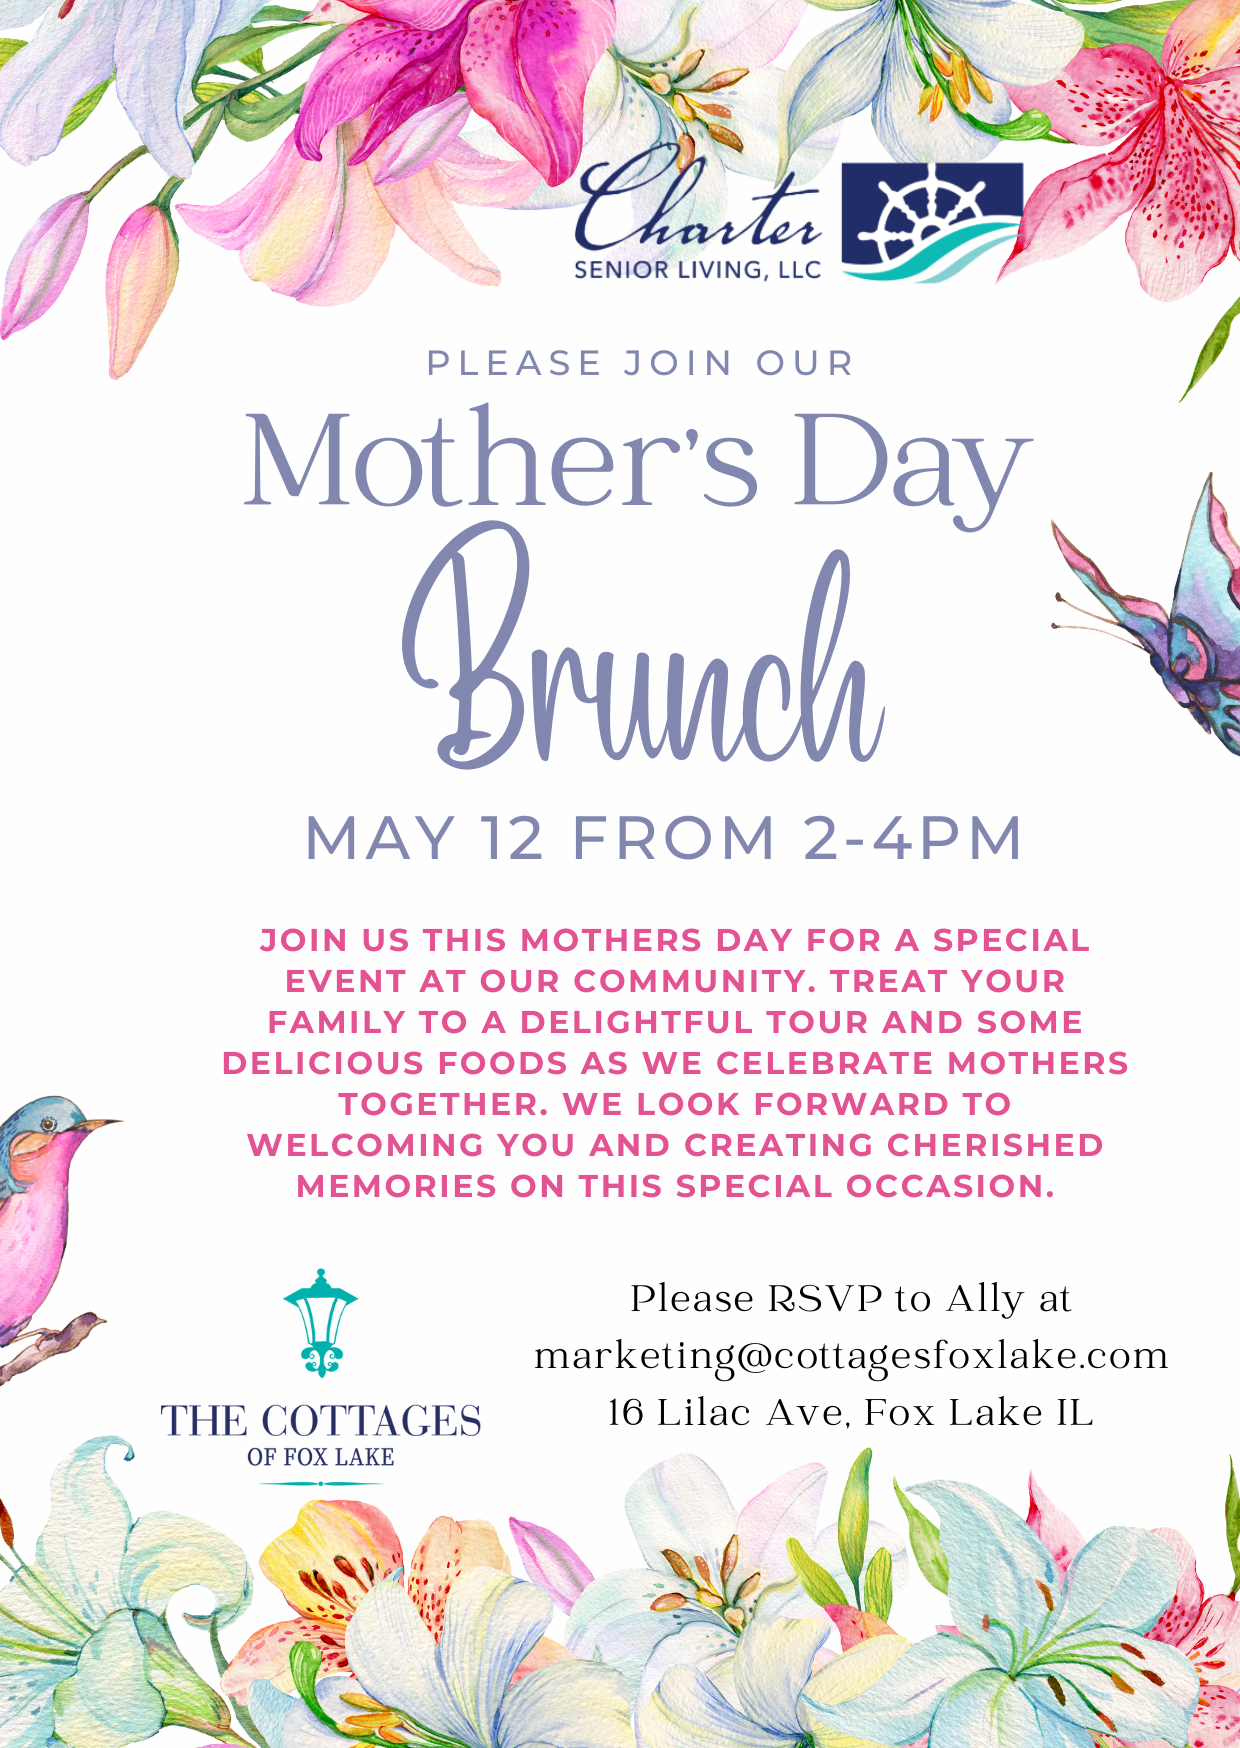 Cottages of Fox Lake - Assisted Living and Memory Care - Mother's Day Brunch